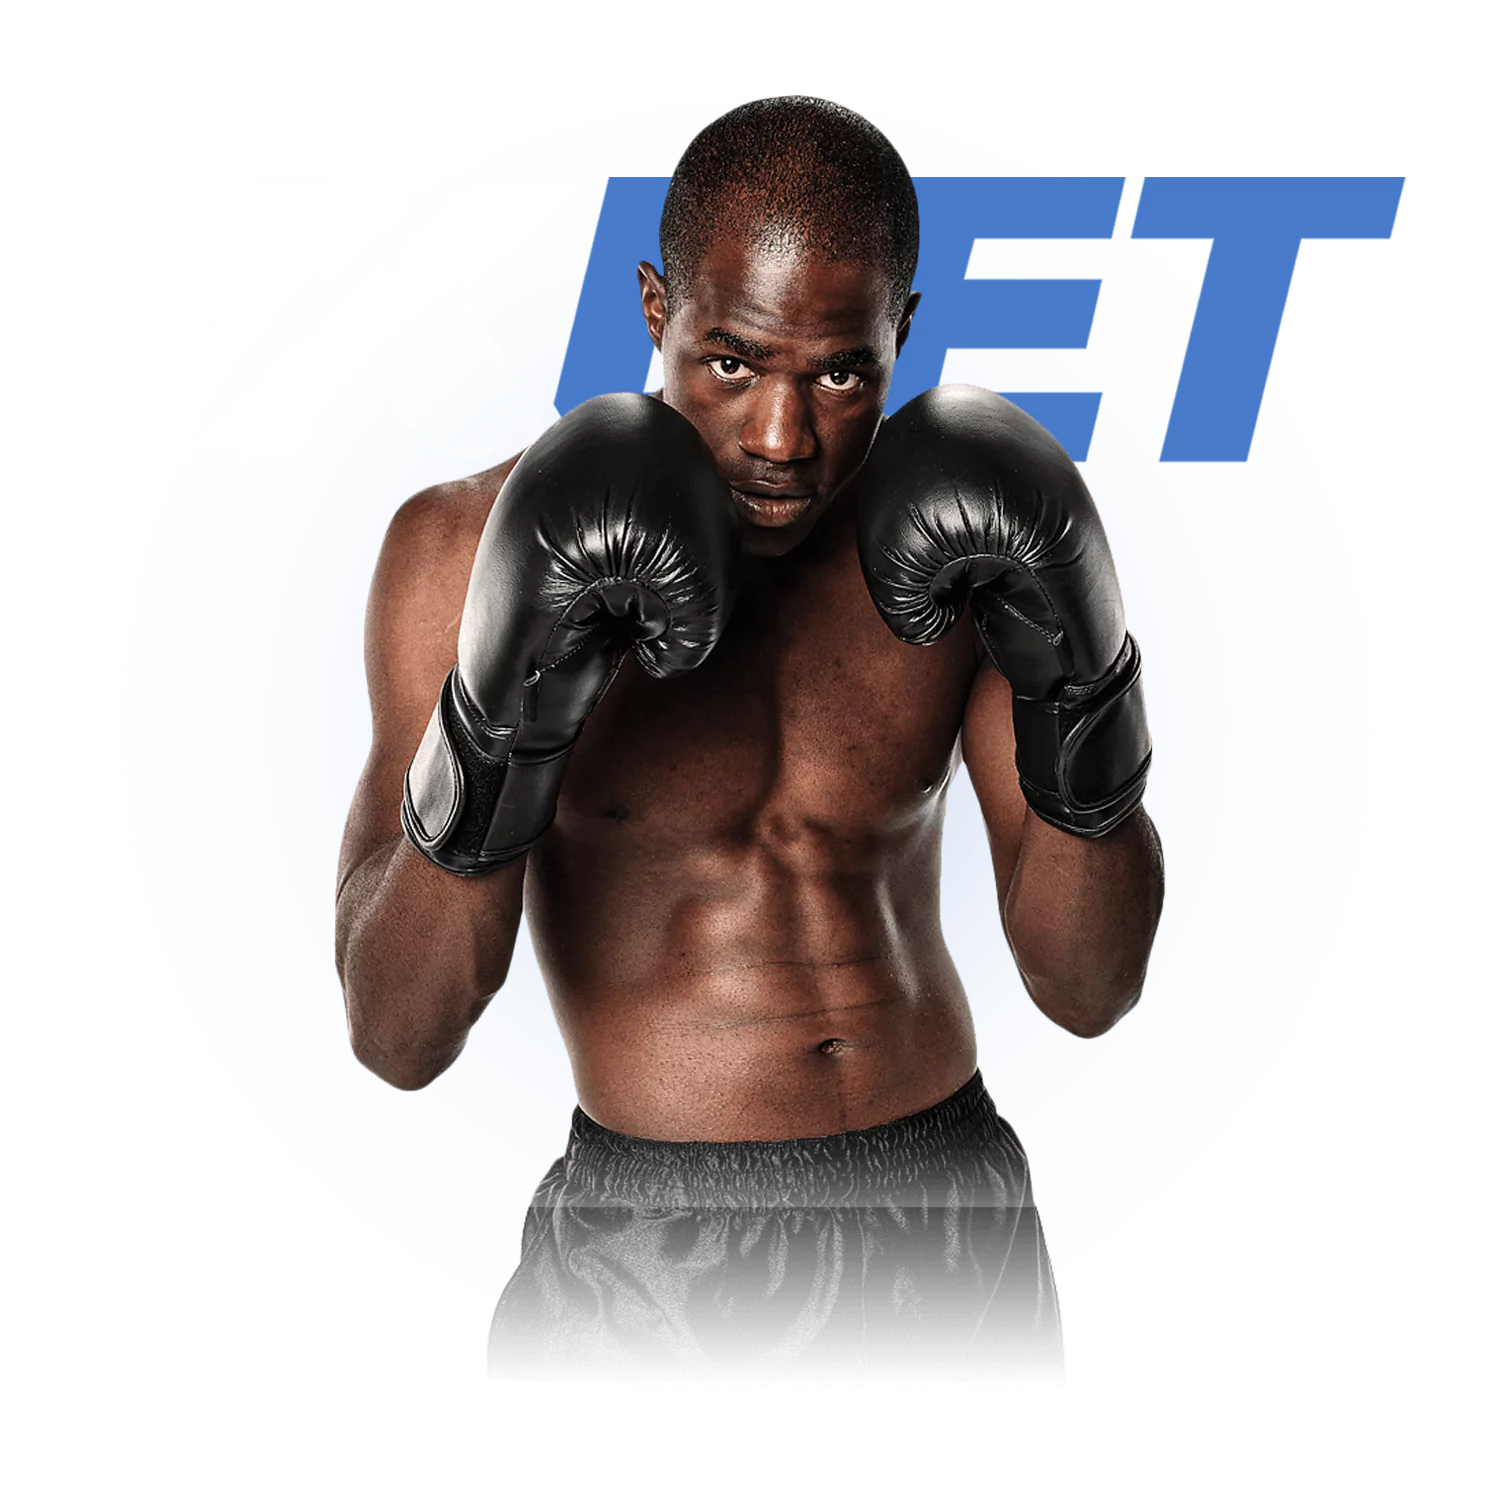 1xBet in India supports boxing bets online.